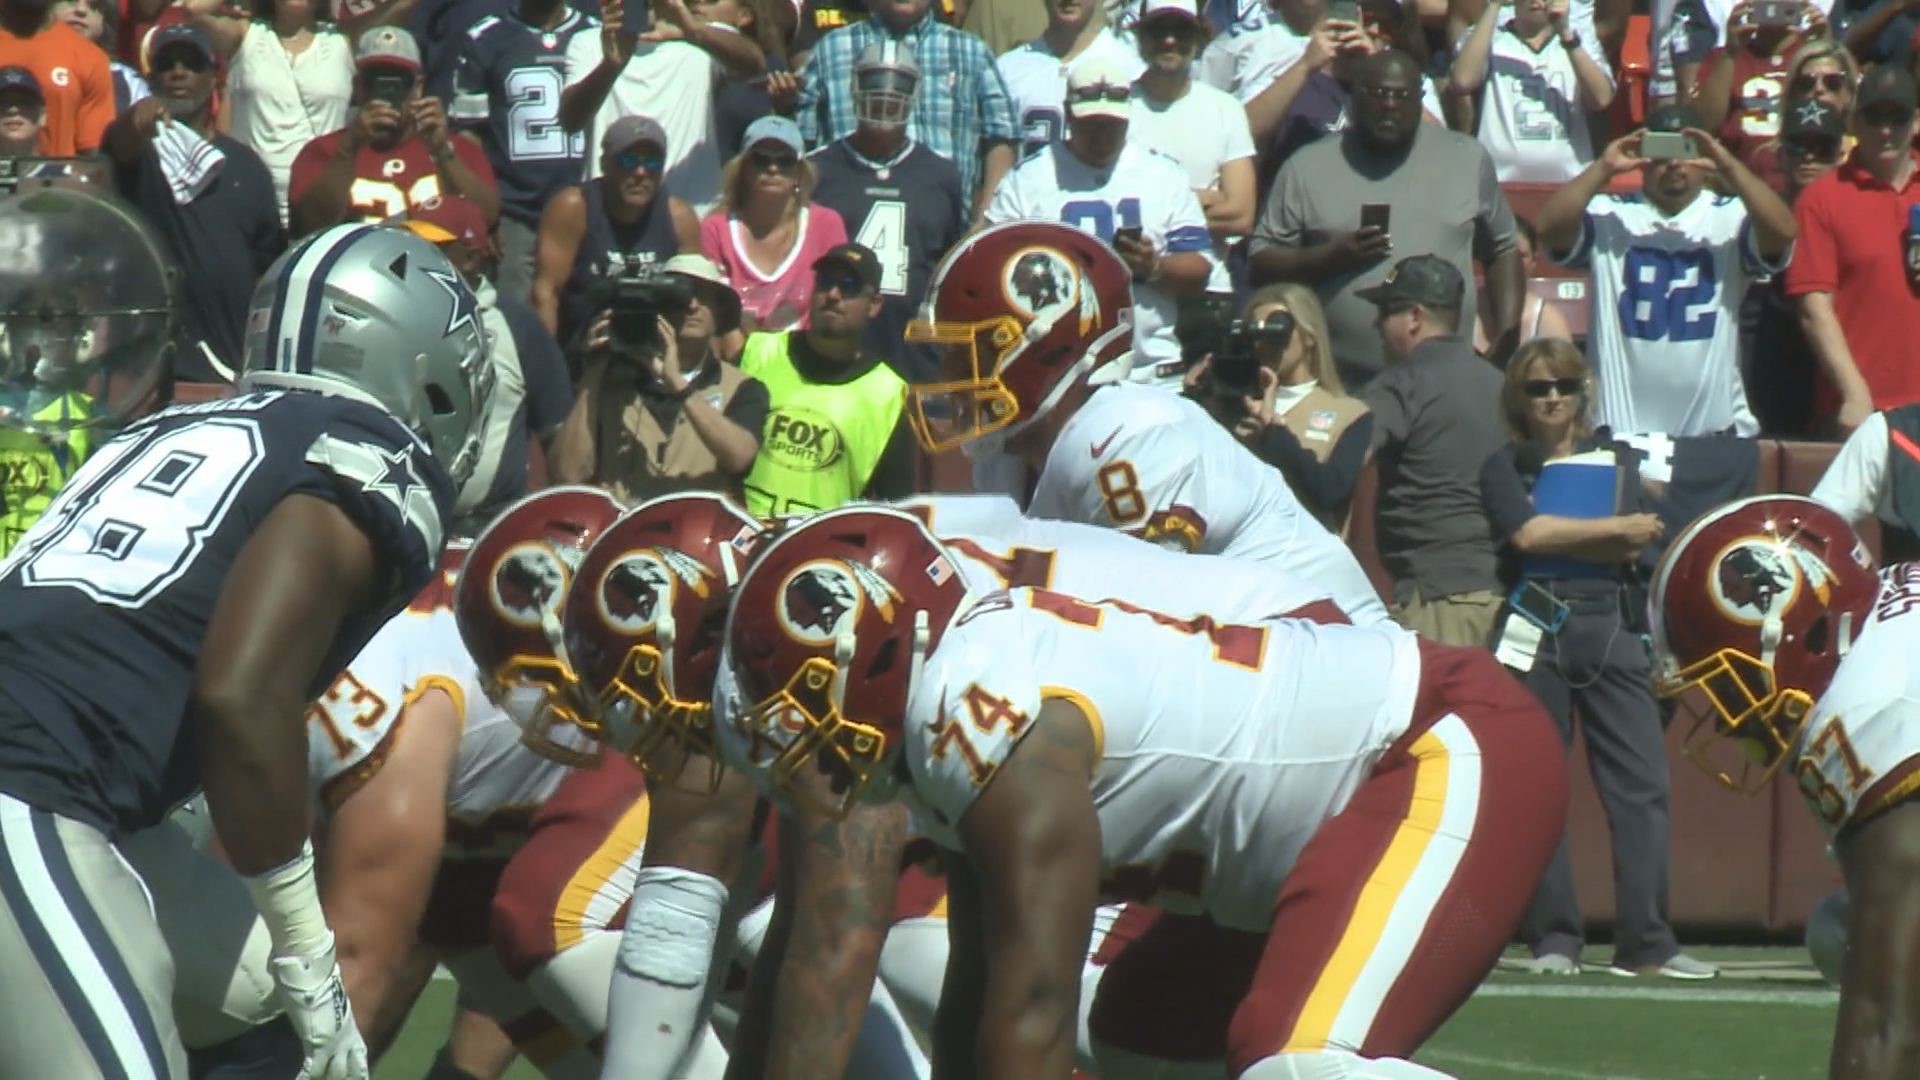 The Redskins are looking to rebound after an 0-2 start to the season.